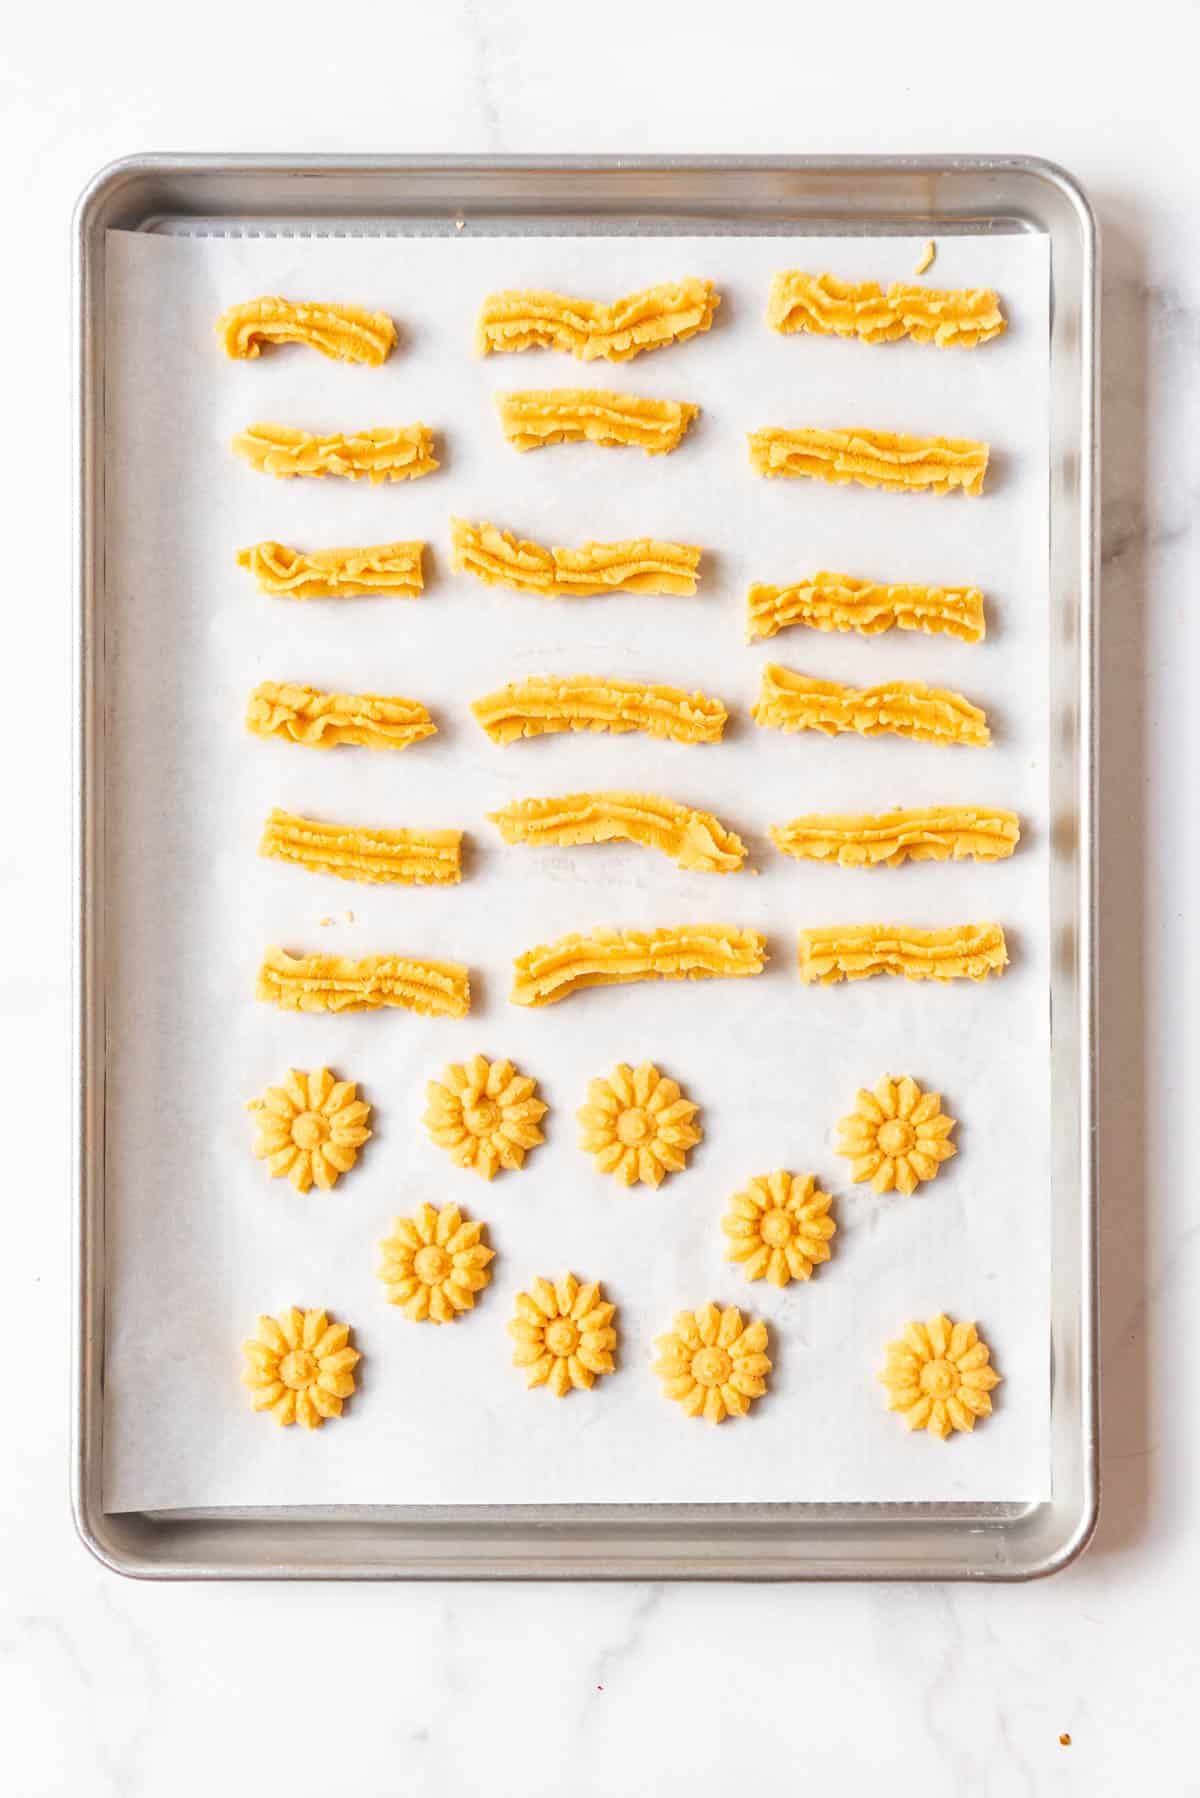 Piped cheese straws on a baking sheet with parchment paper.